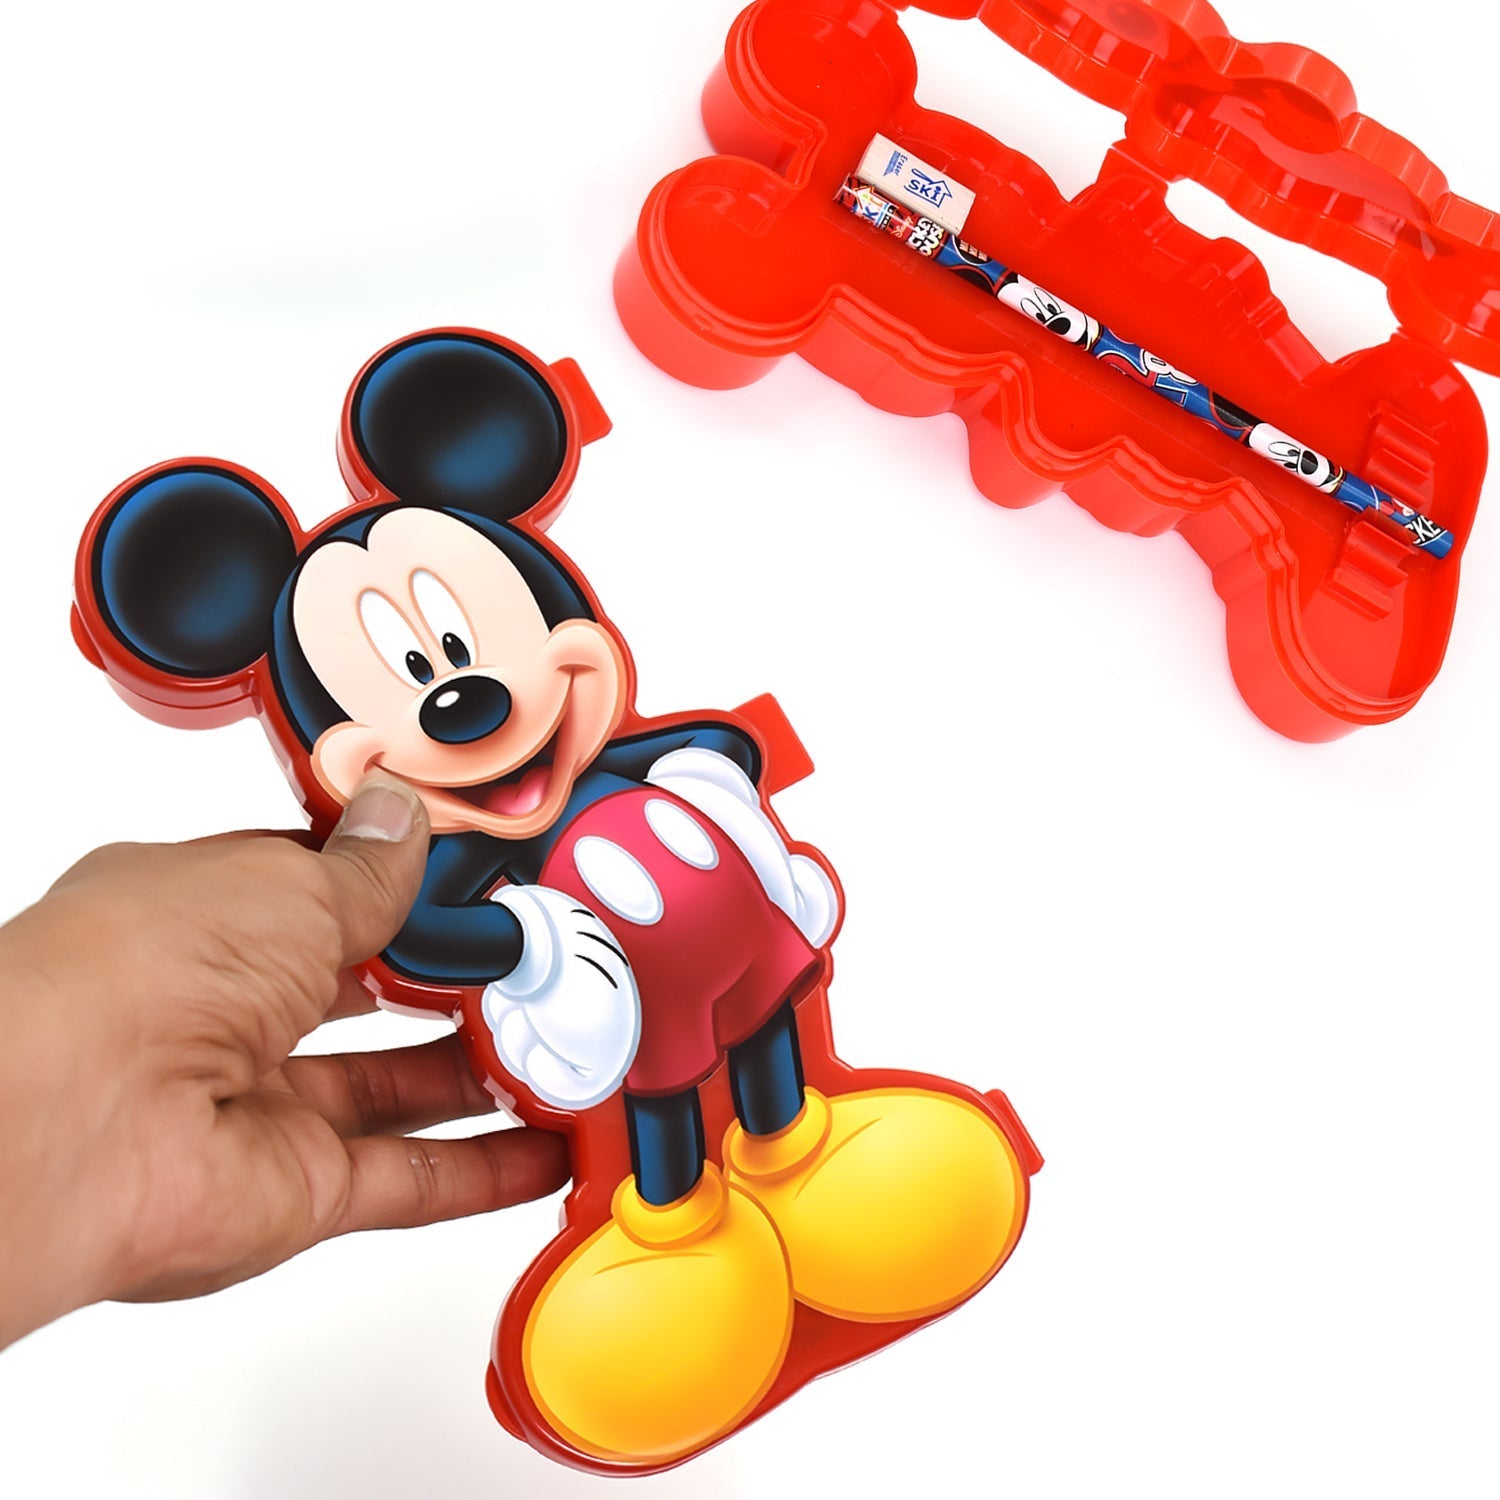 8083 Mickey M Pencil Box Used for holding pencils and stationary items by kids. freeshipping - DeoDap